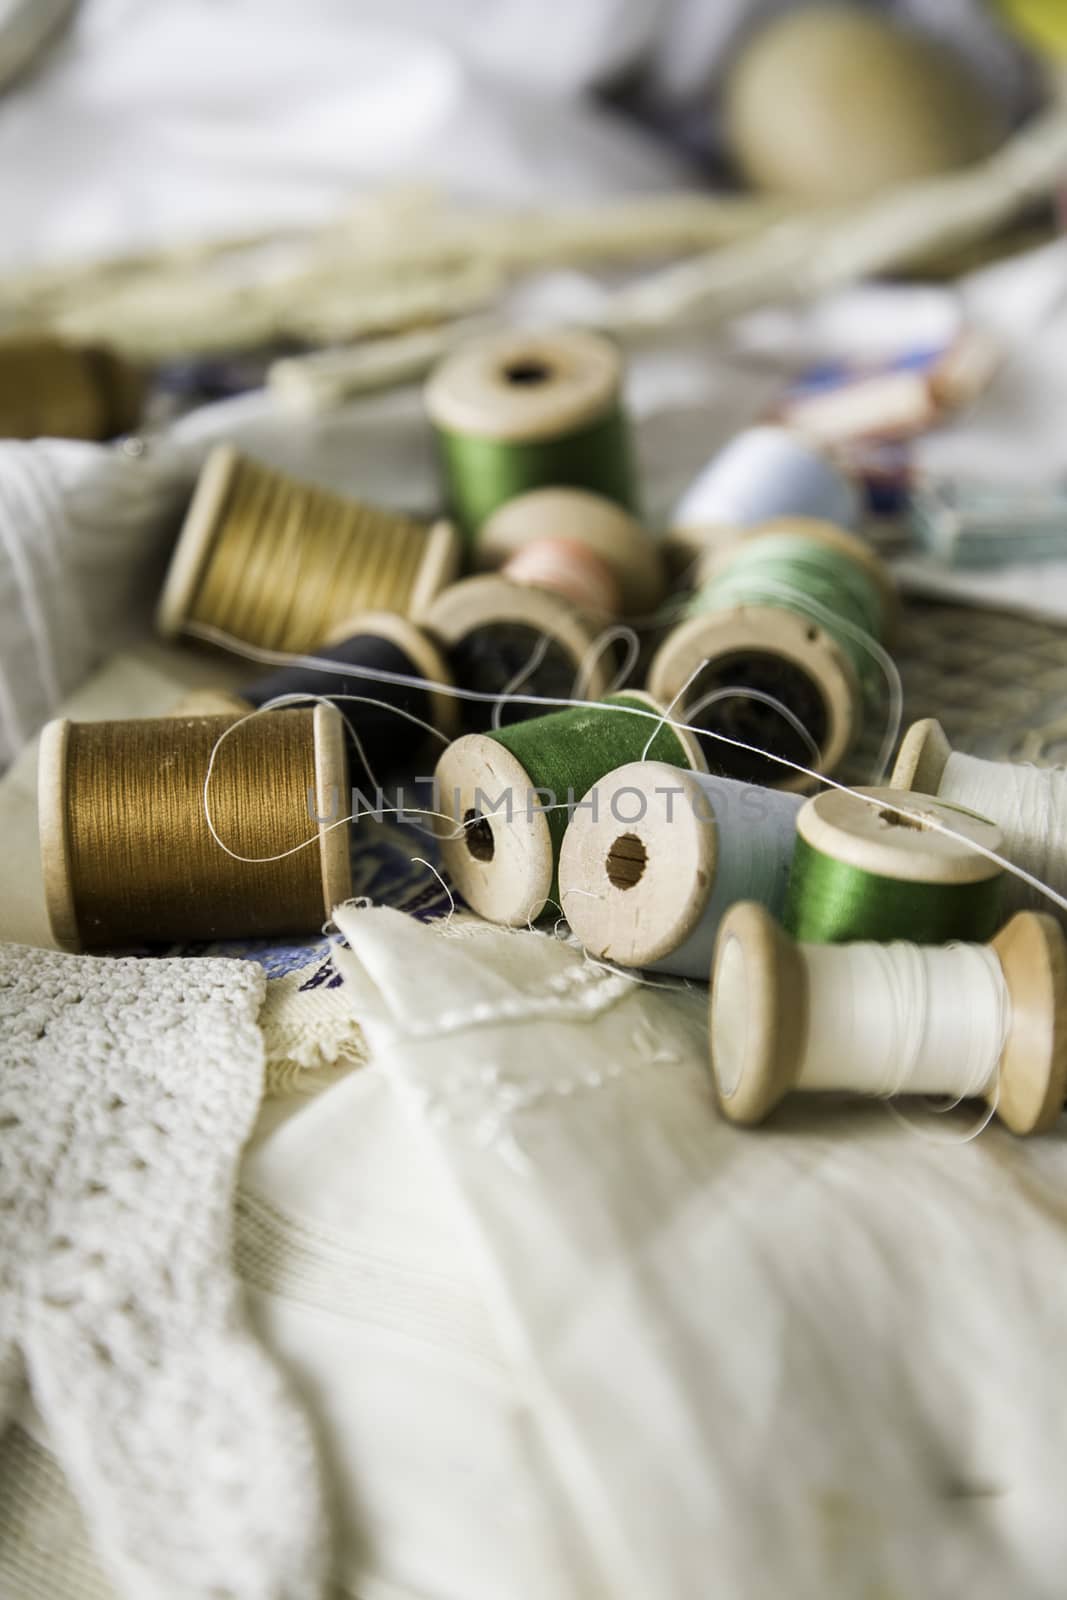 Old sewing threads, objects for sewing clothes